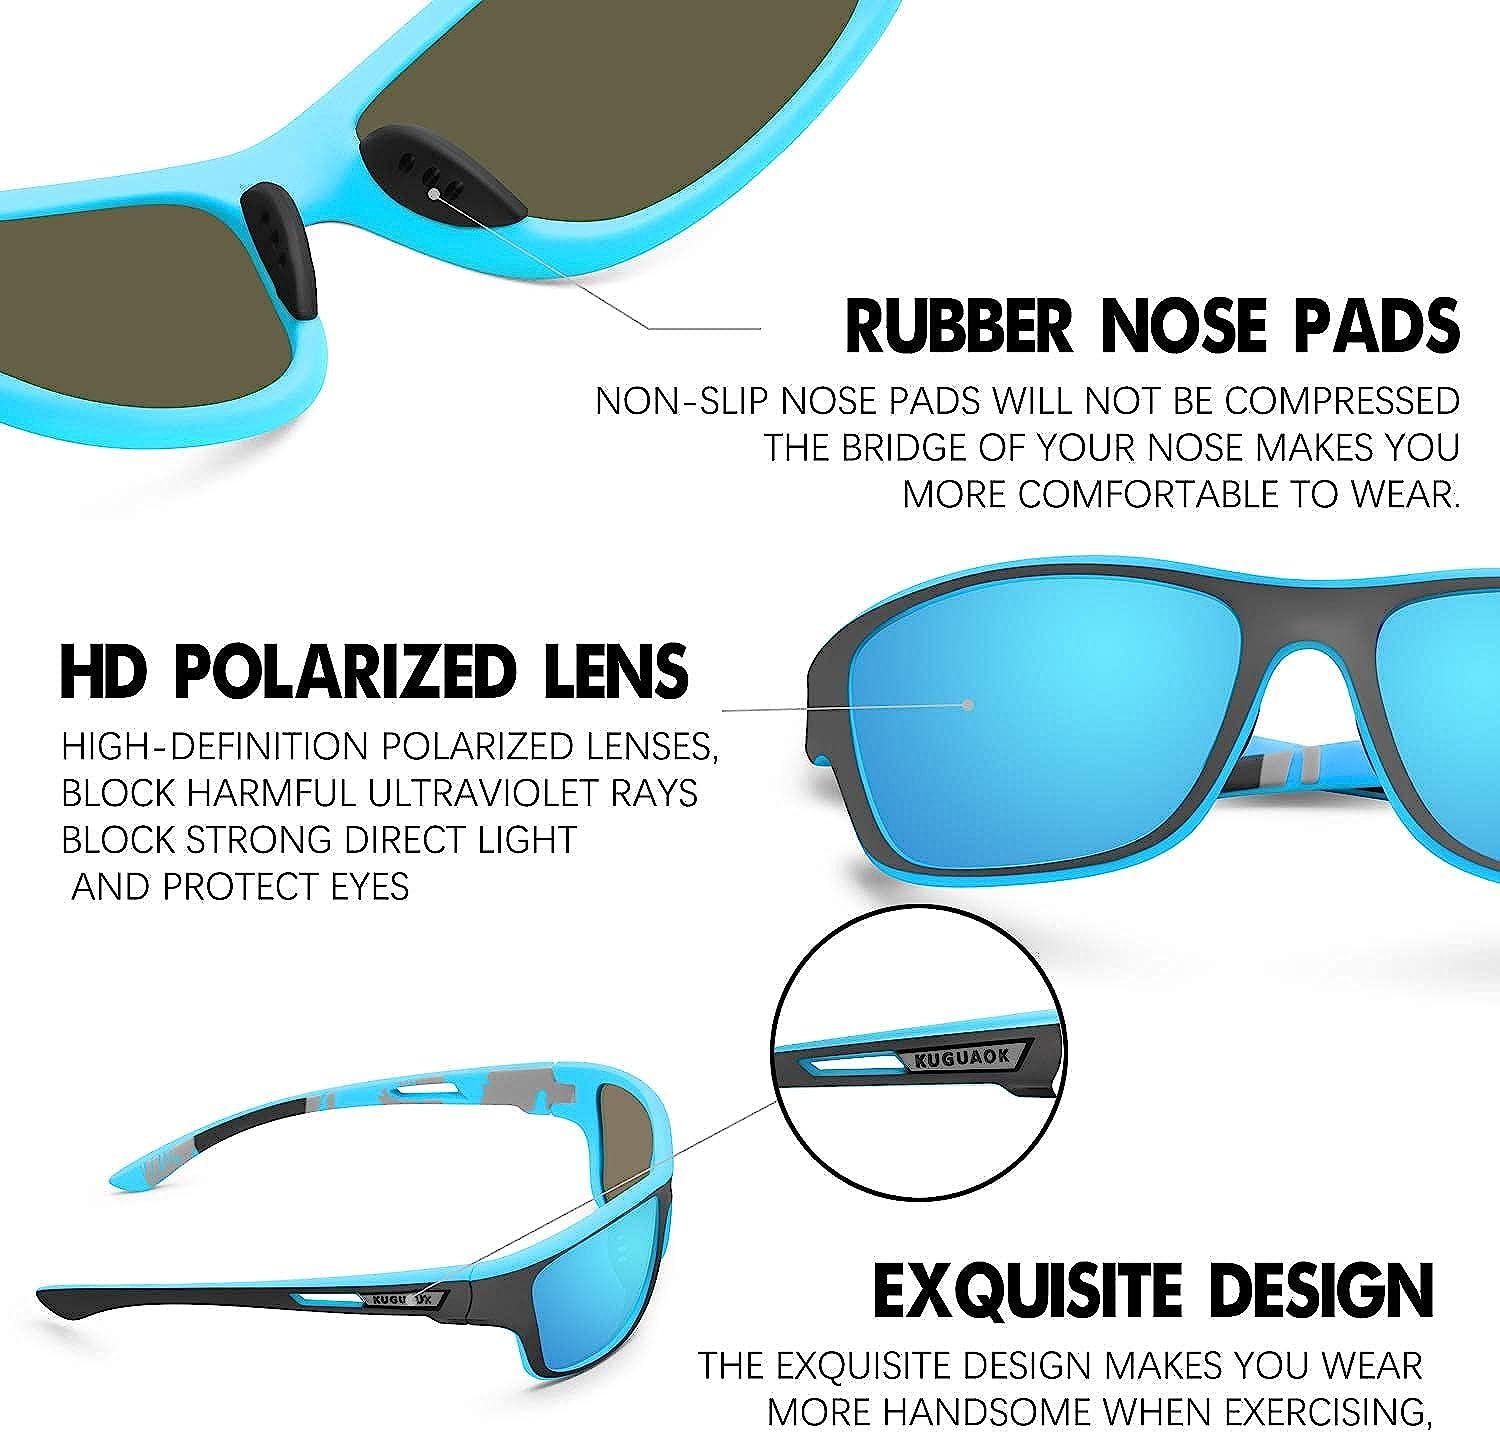 Men's sunglasses: UV protected sunglasses that you must wear